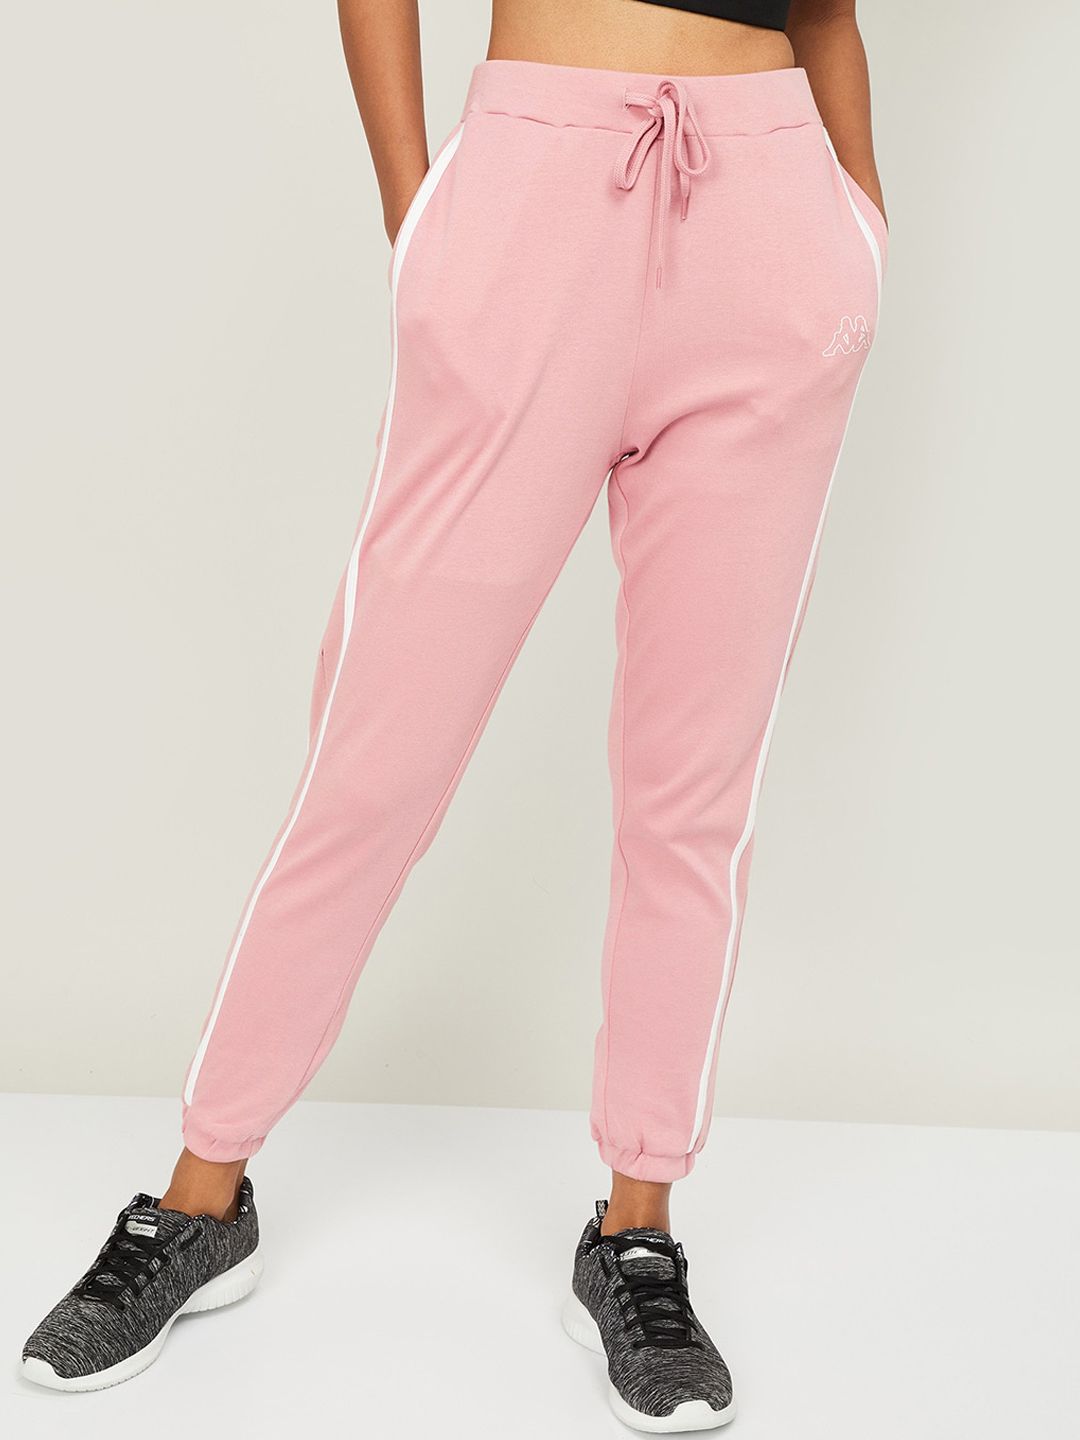 Kappa Women Pink Slim Fit Solid Joggers Price in India